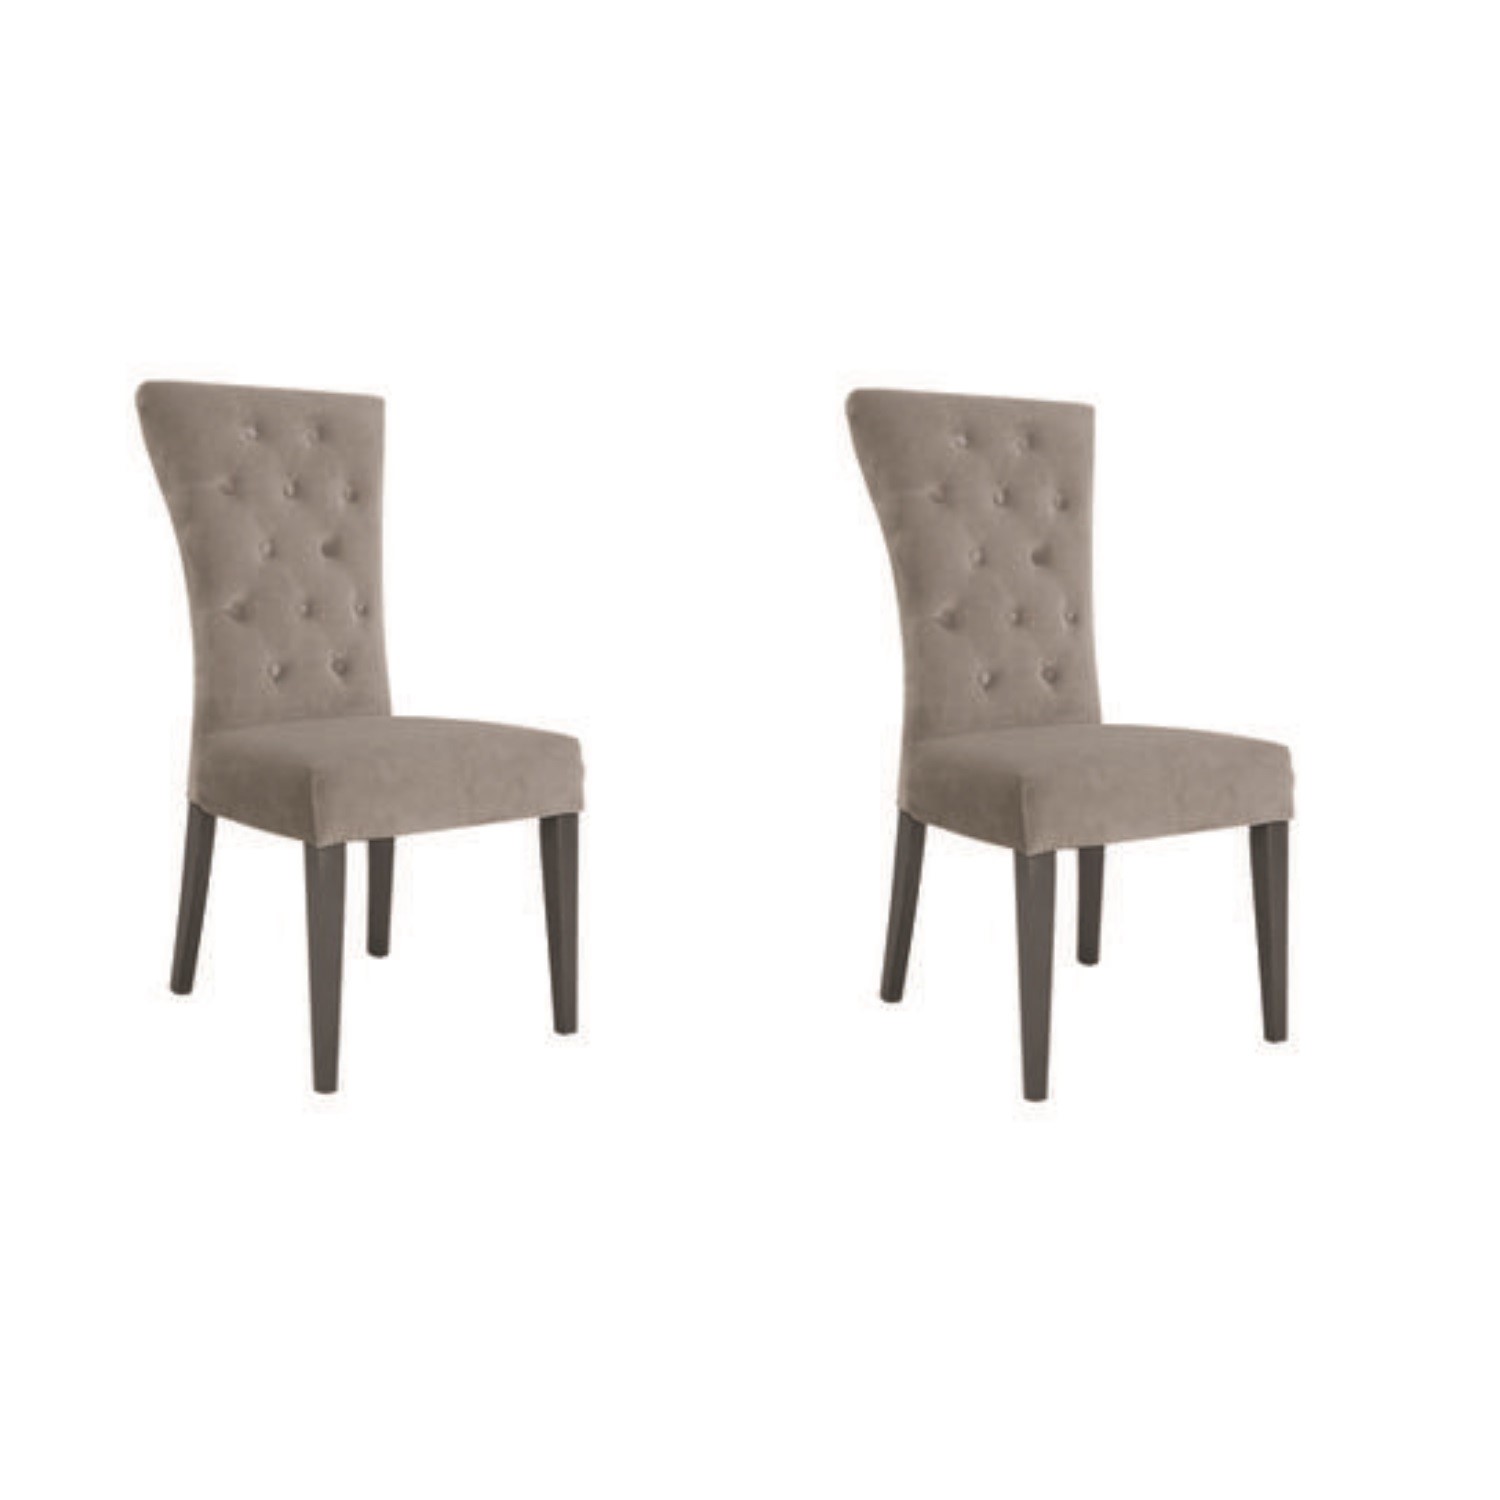 Pembroke Pair Of Taupe Velvet Dining Chairs With Solid Wood Legs Furniture123